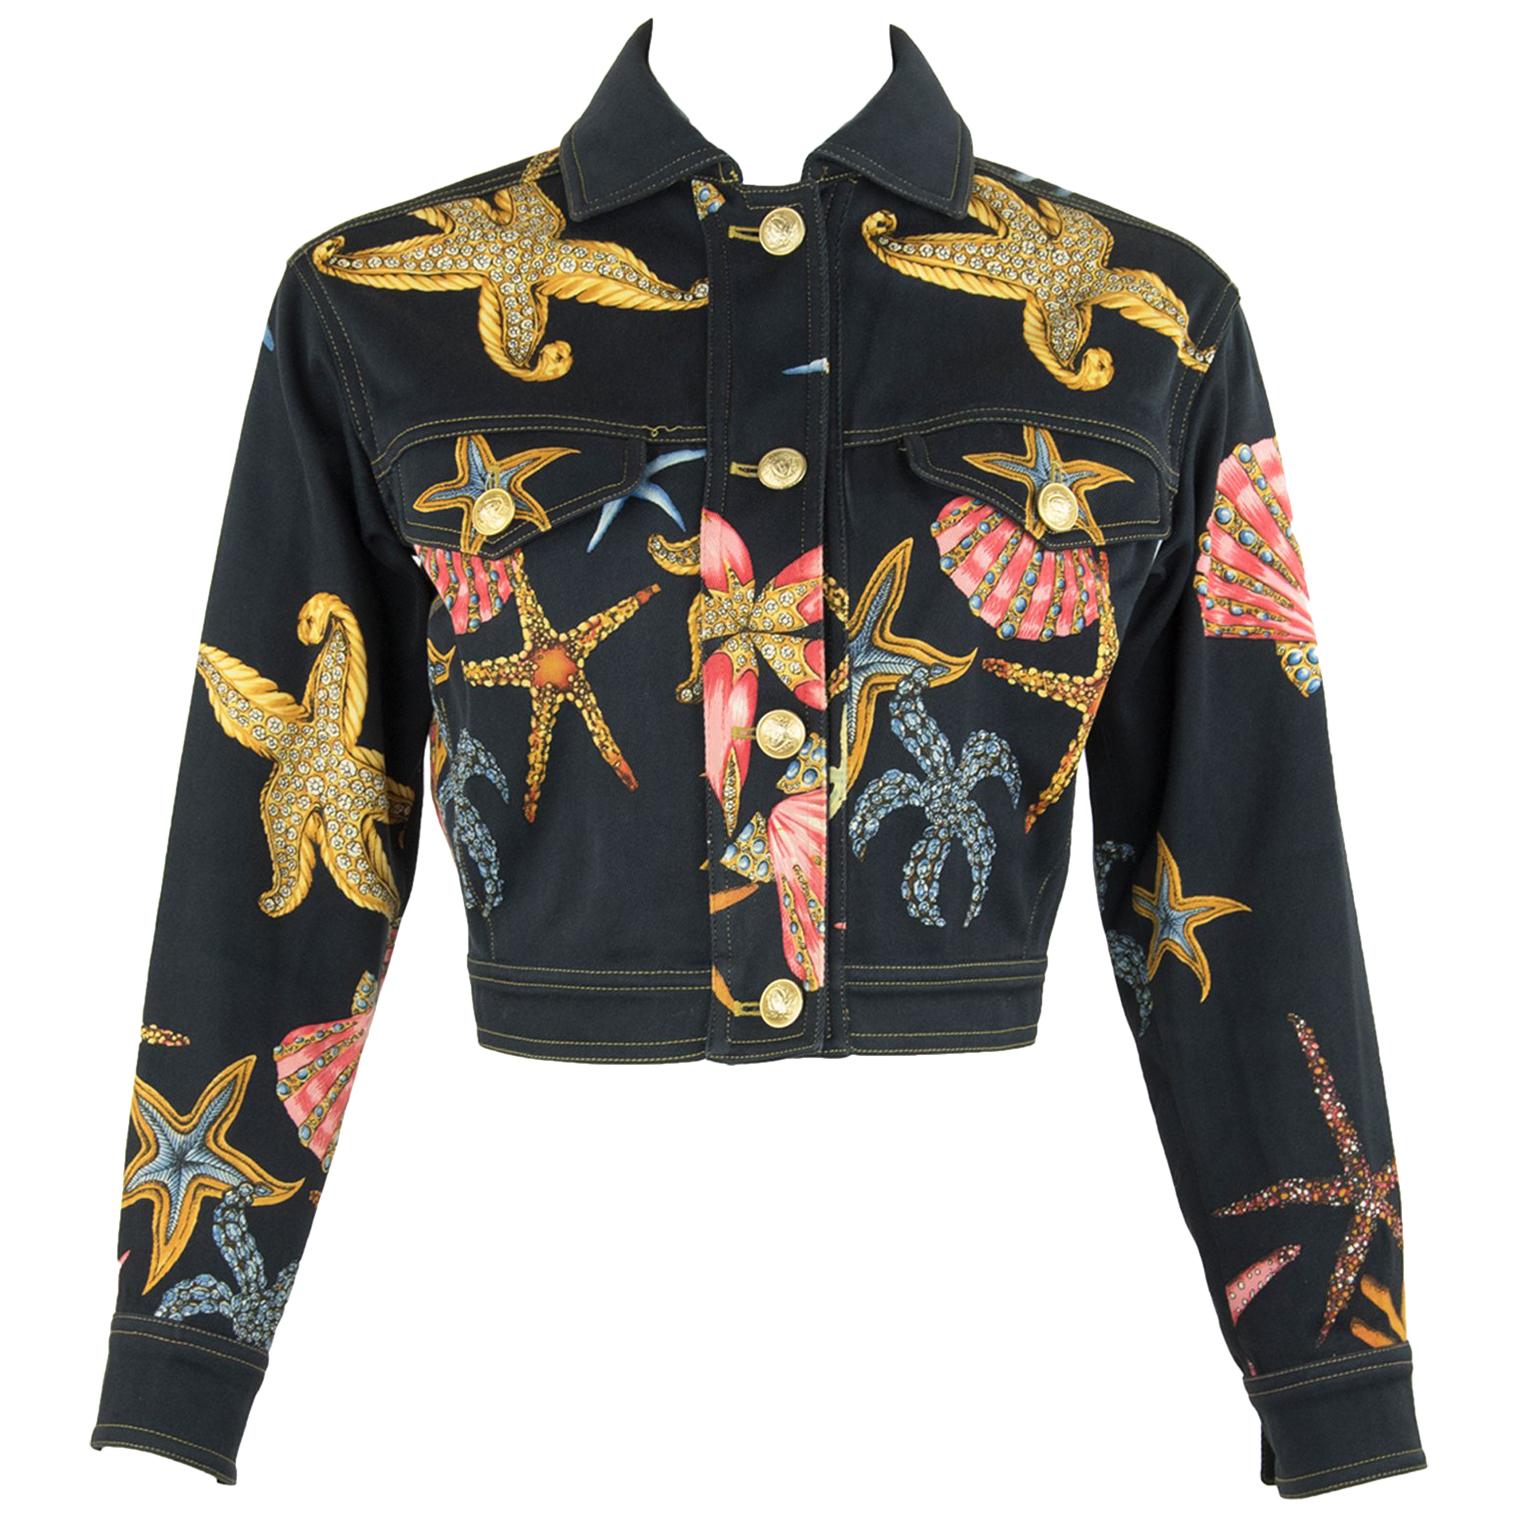 Vintage Gianni Versace Starfish Jacket - Size XS/S For Sale